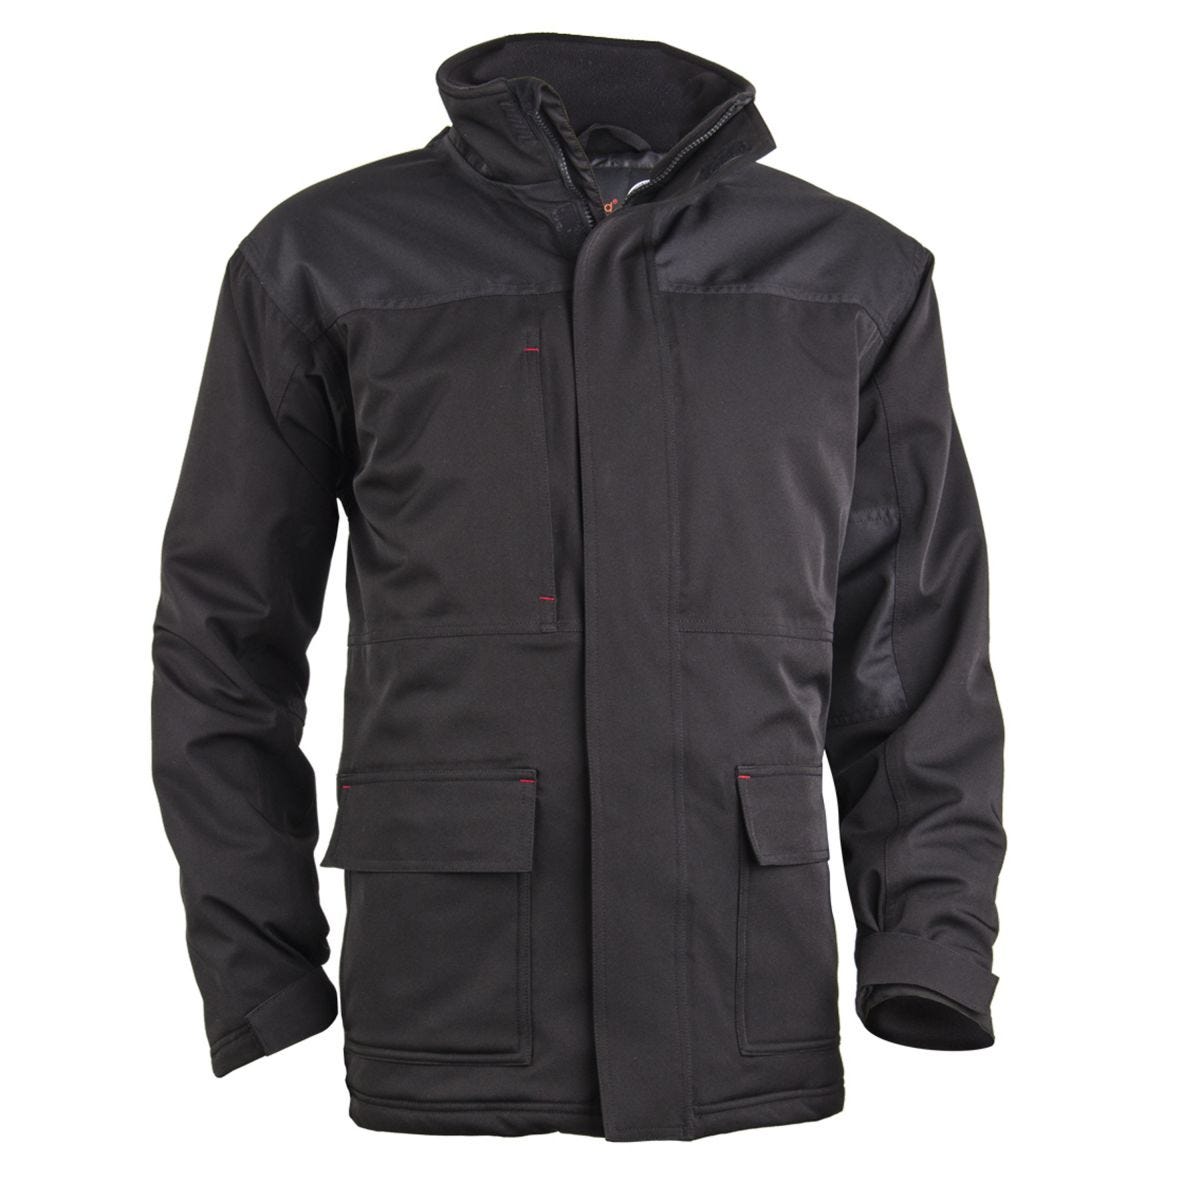 Parka YANG WINTER PRO Noire Softshell - COVERGUARD - Taille XL 0